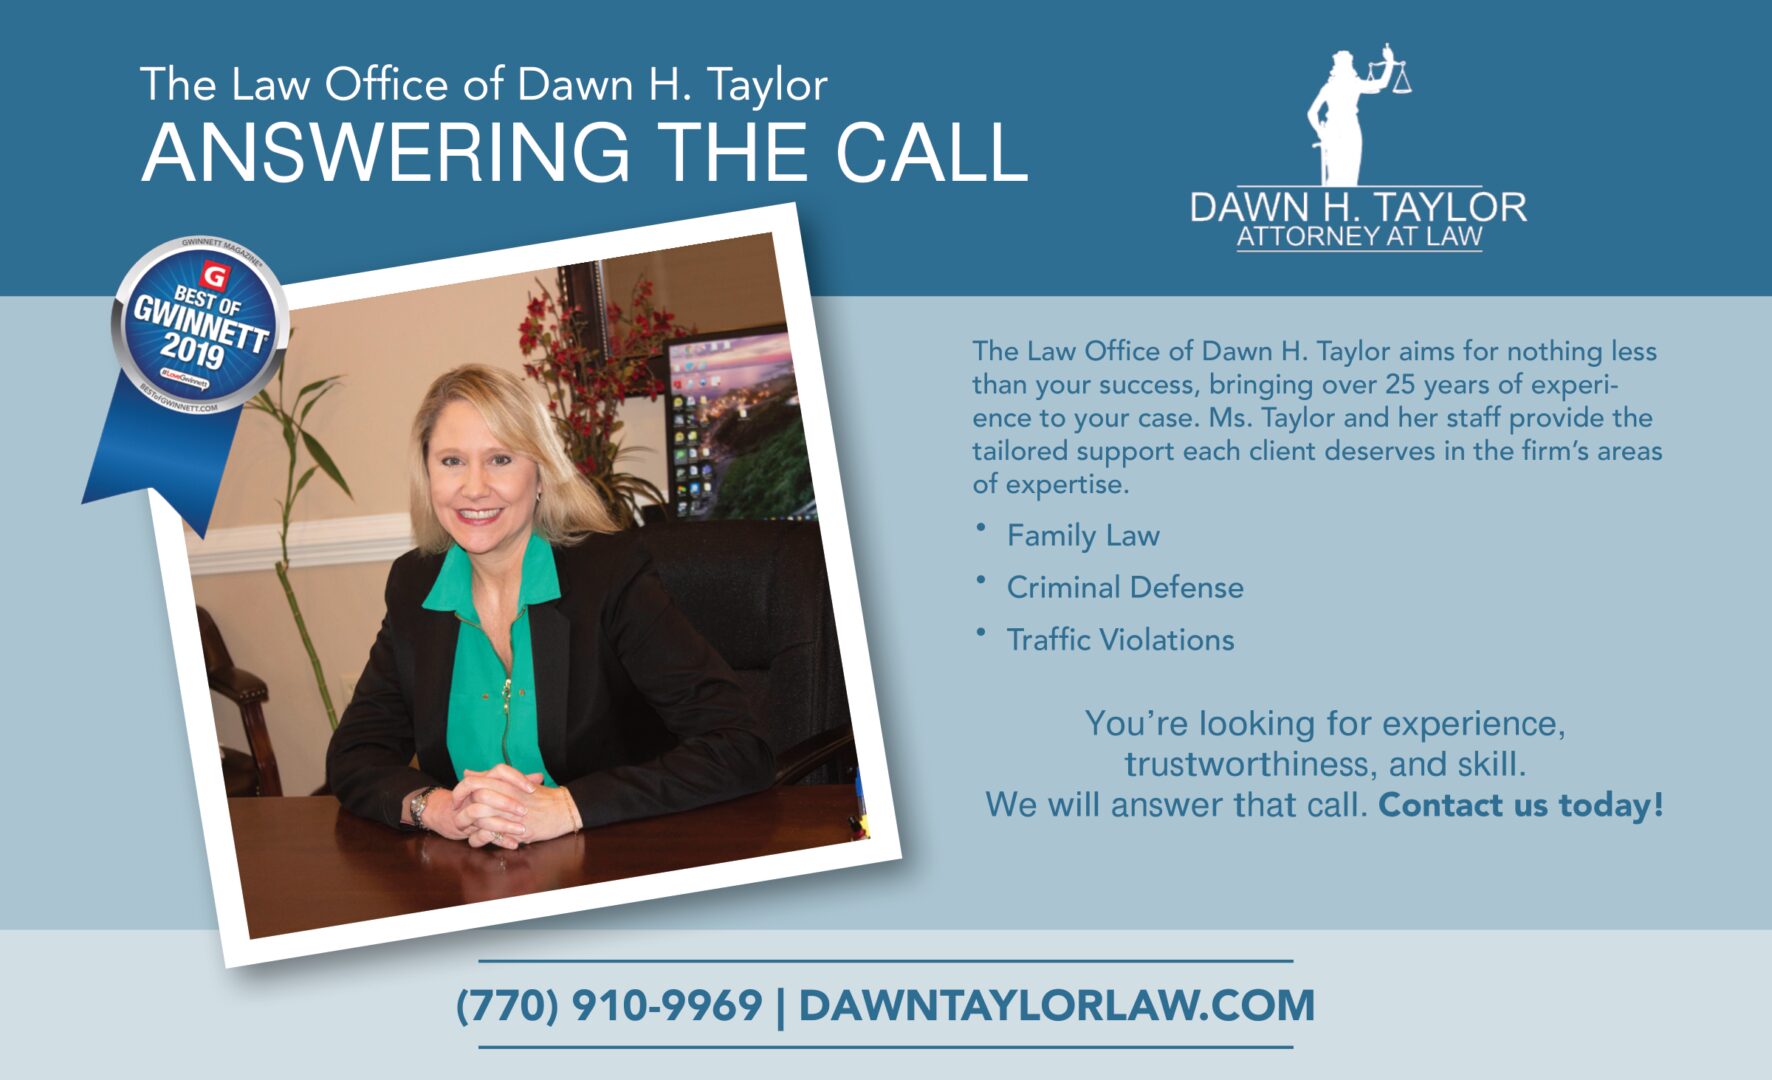 A picture of dawn taylor in an ad for the law office.